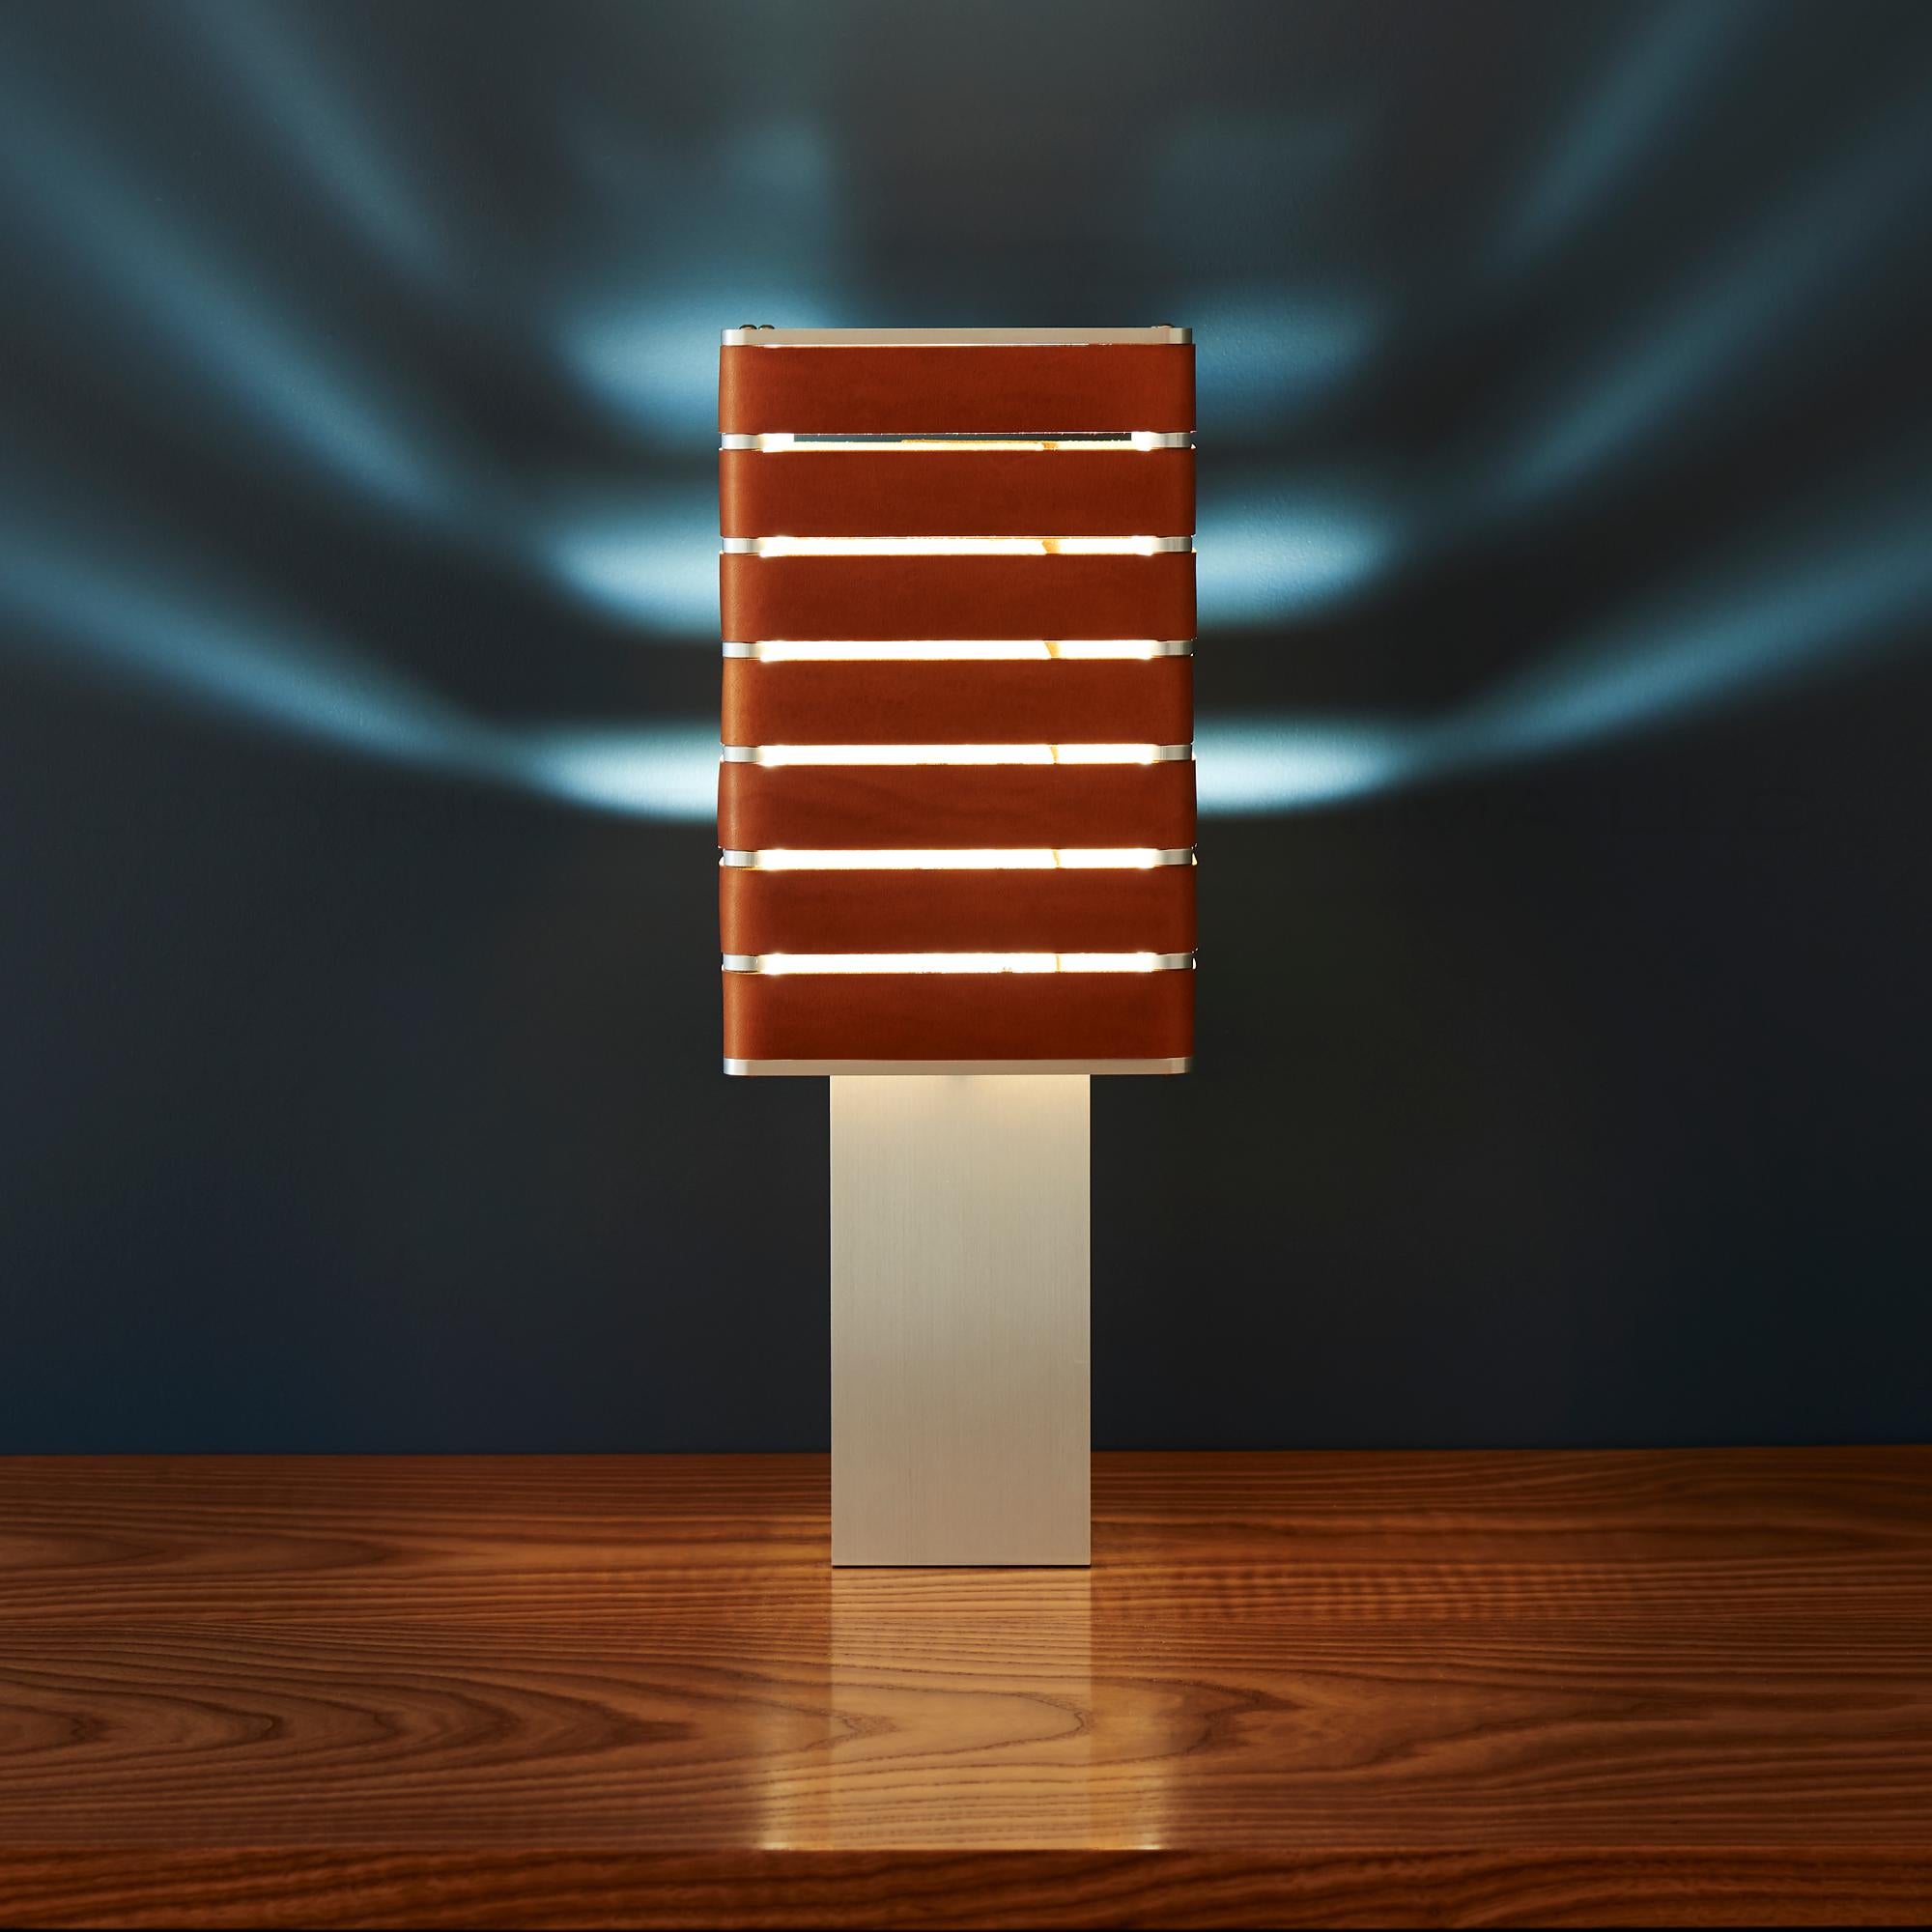 Contemporary Modern, Minimal, Solid Metal Table Light in Ambra Brown Italian Leather